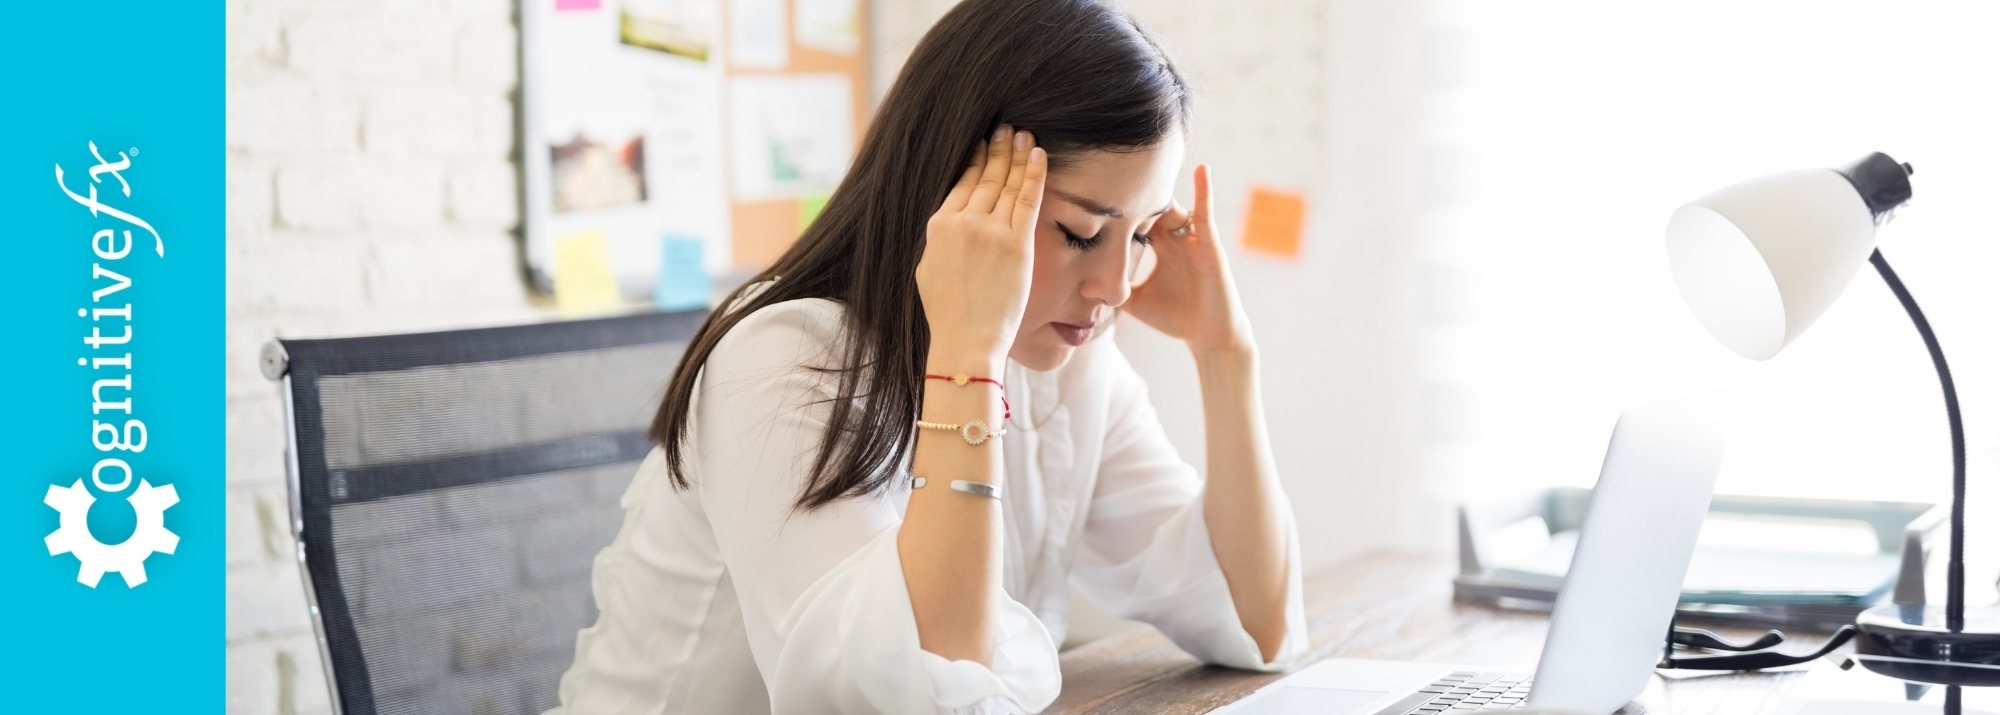 Recurring Concussion Symptoms: Causes and Treatment